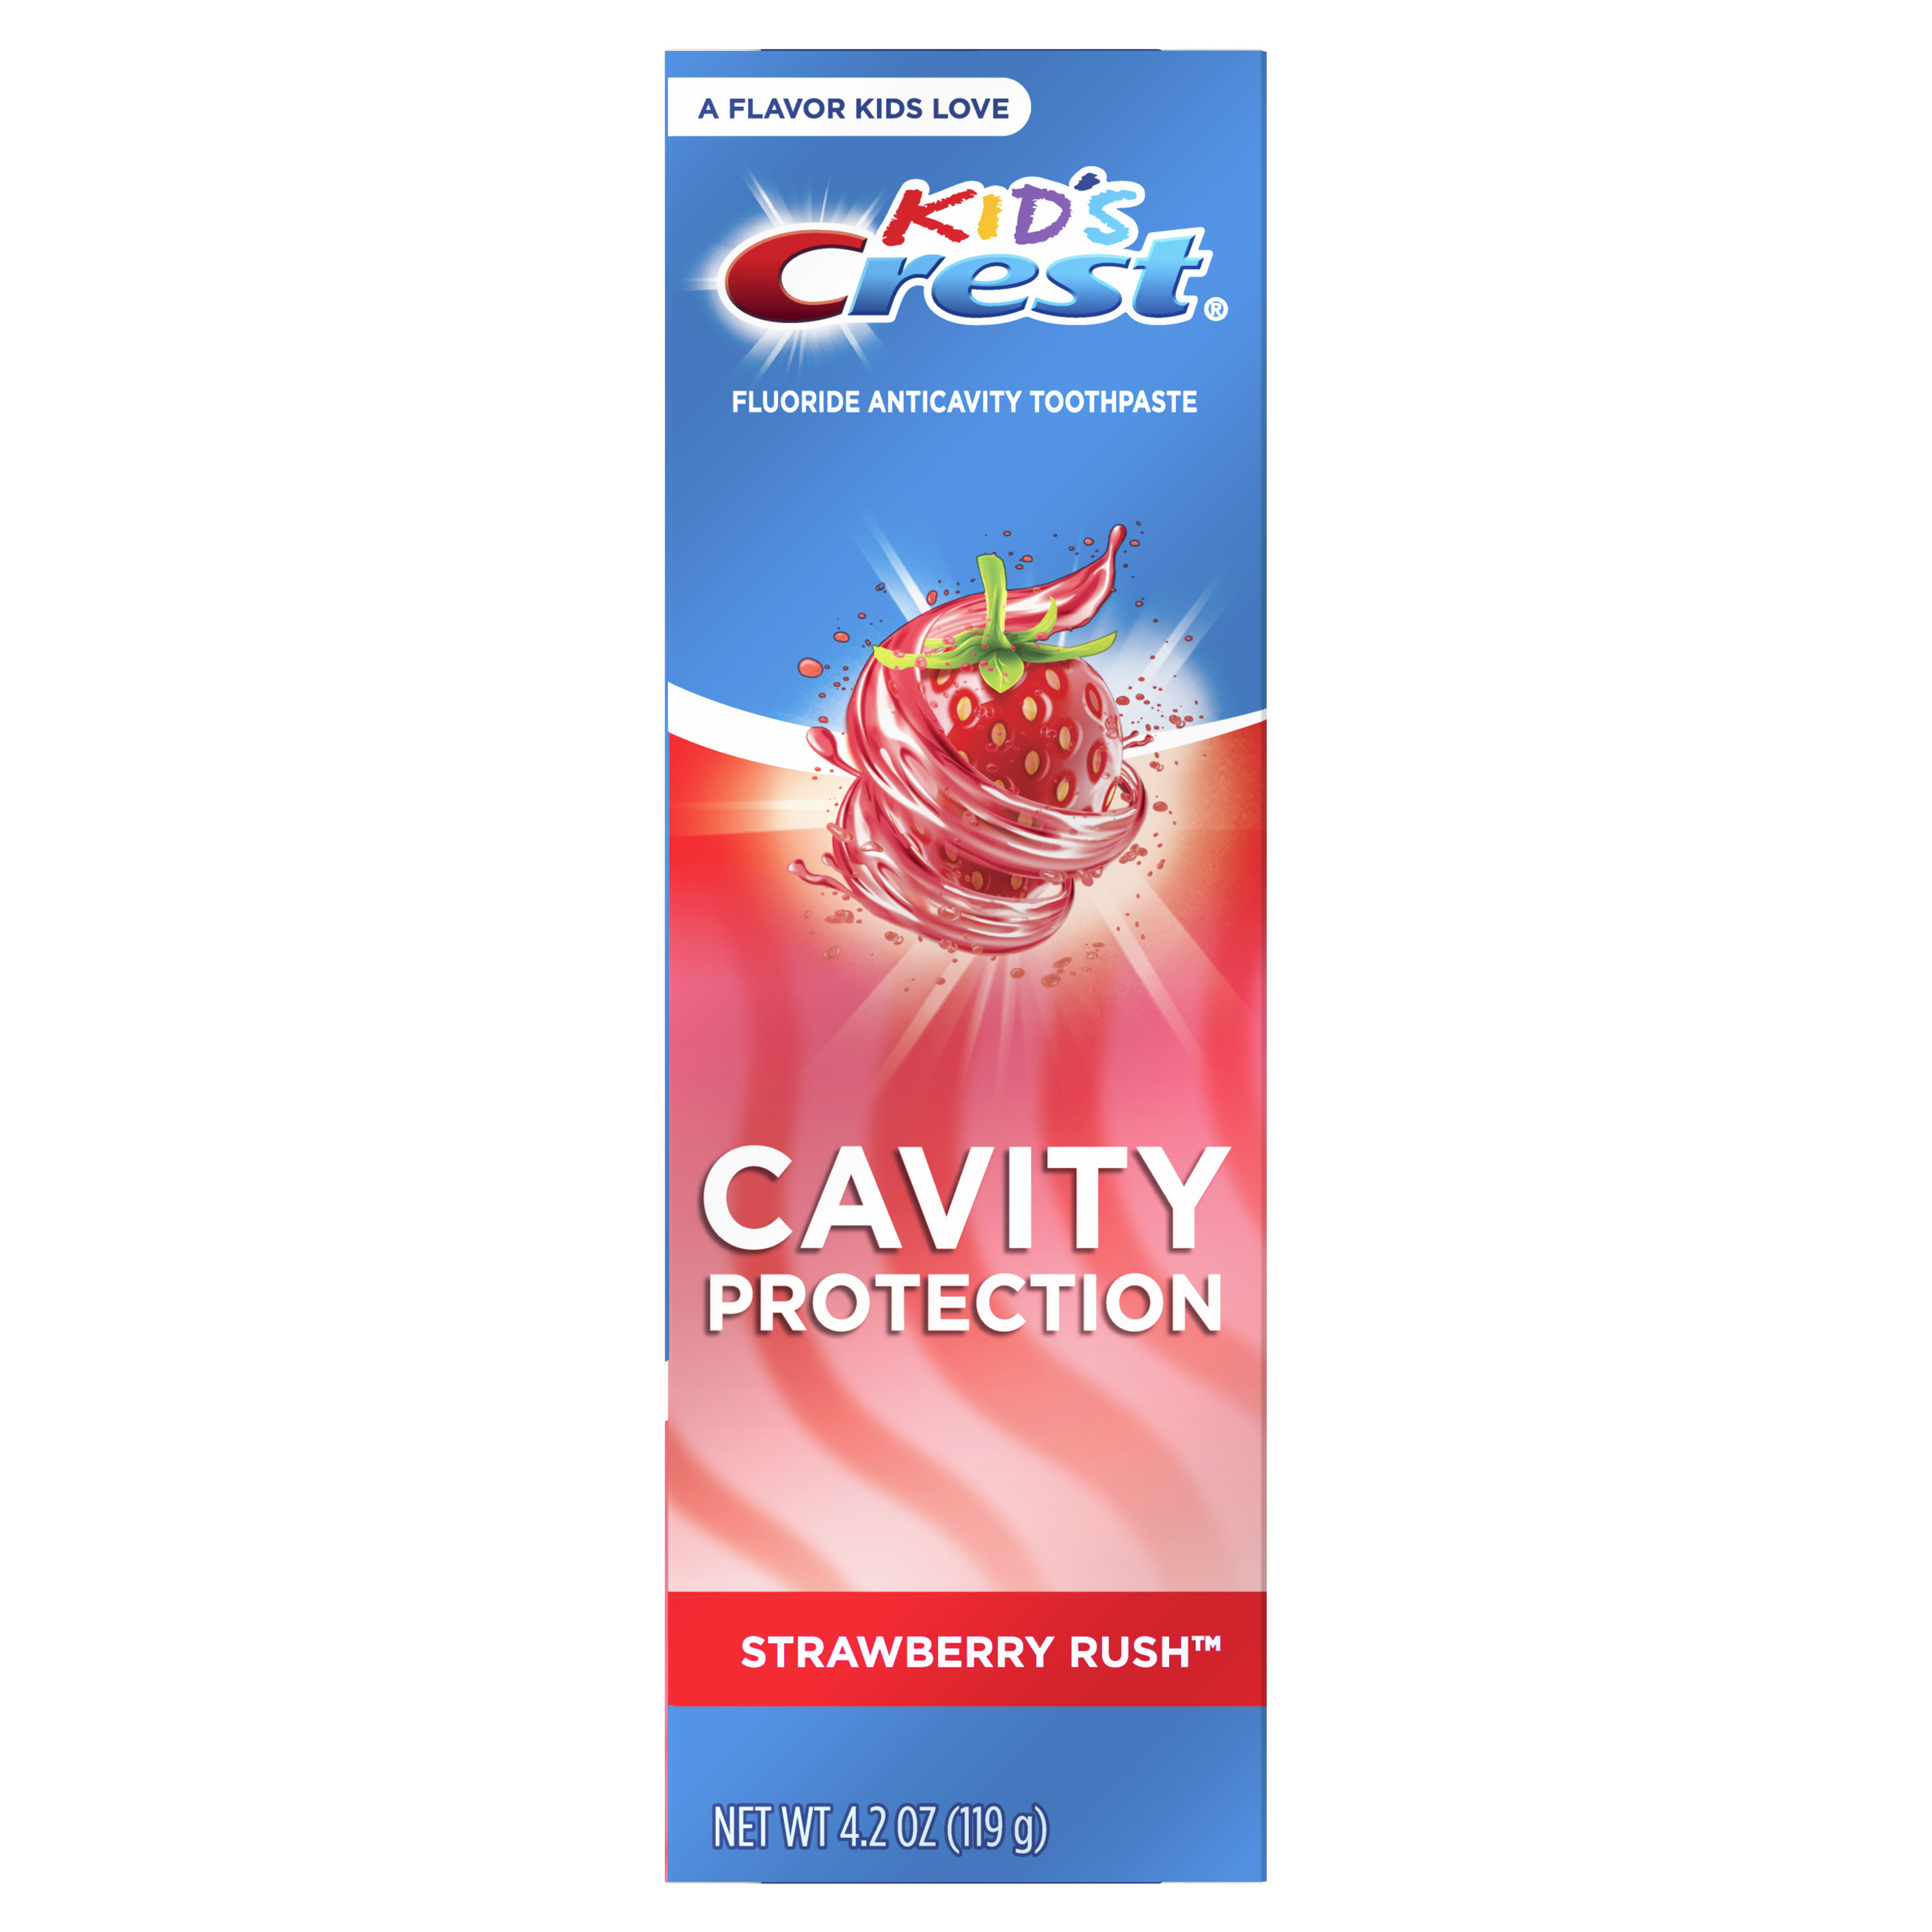 Crest Kid's Cavity Protection Fluoride Toothpaste, Strawberry Rush, 4.2 oz - image 1 of 6